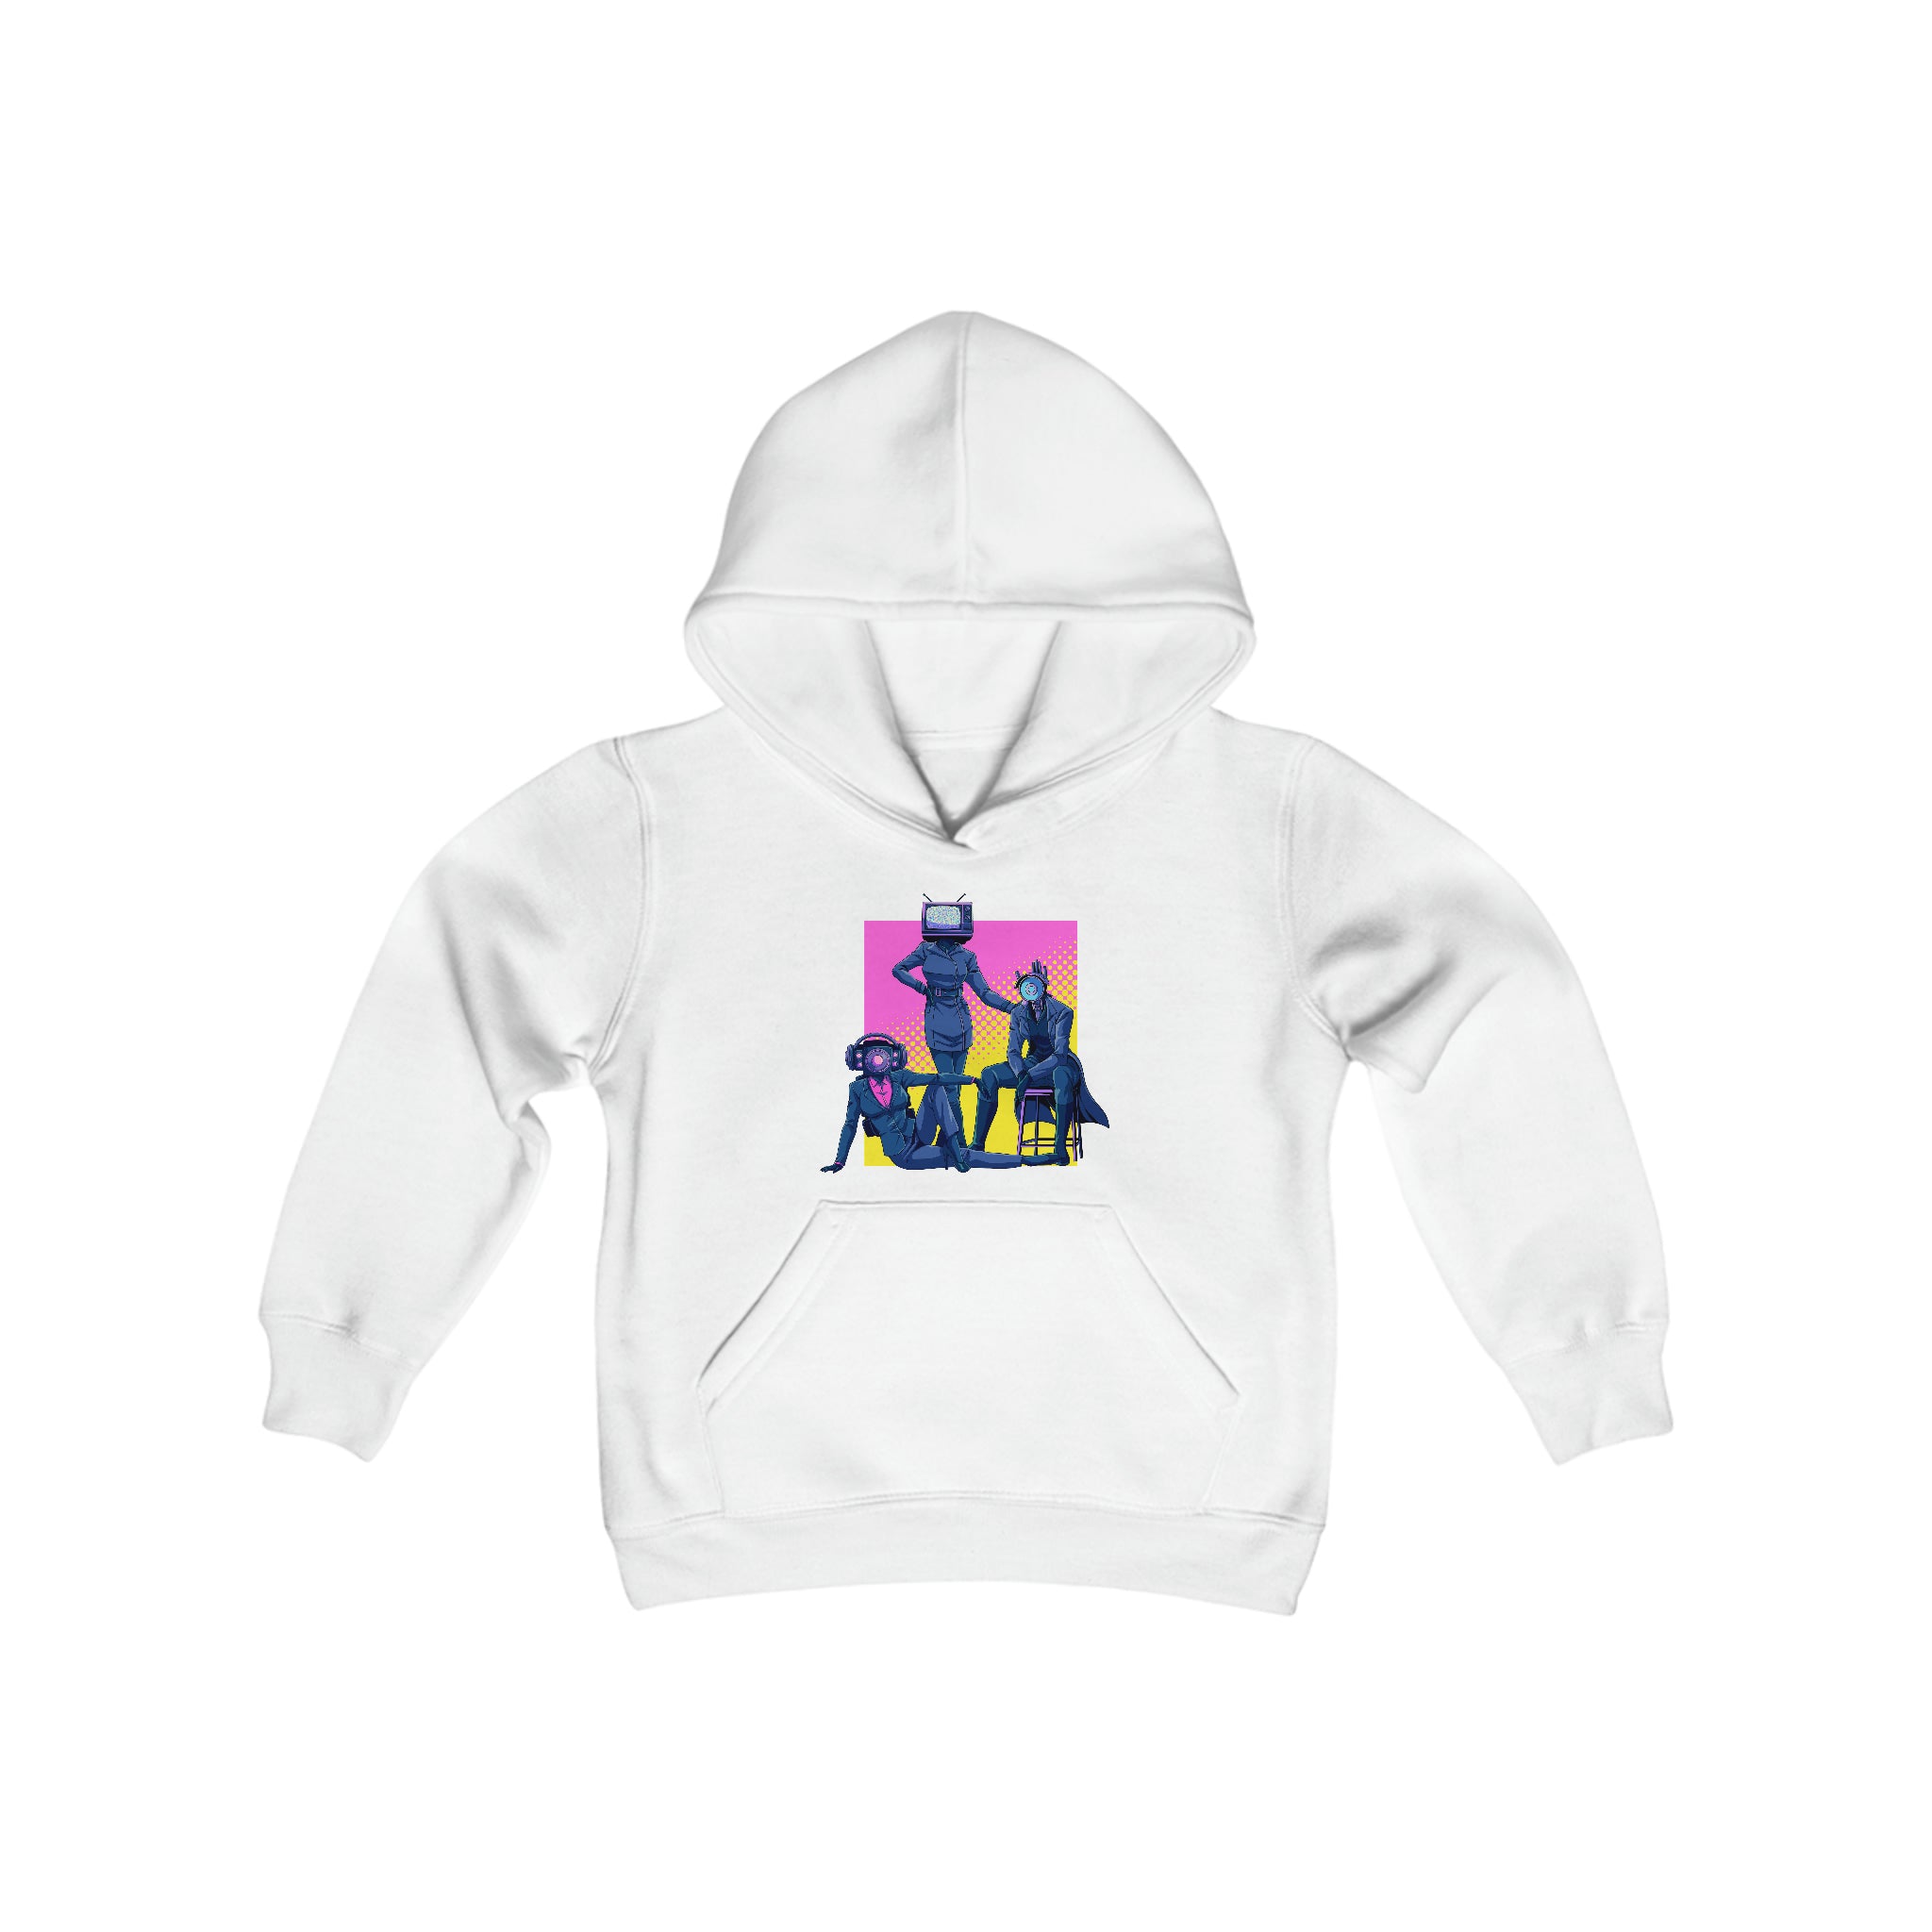 Lethal Trio Hoodie - Youth